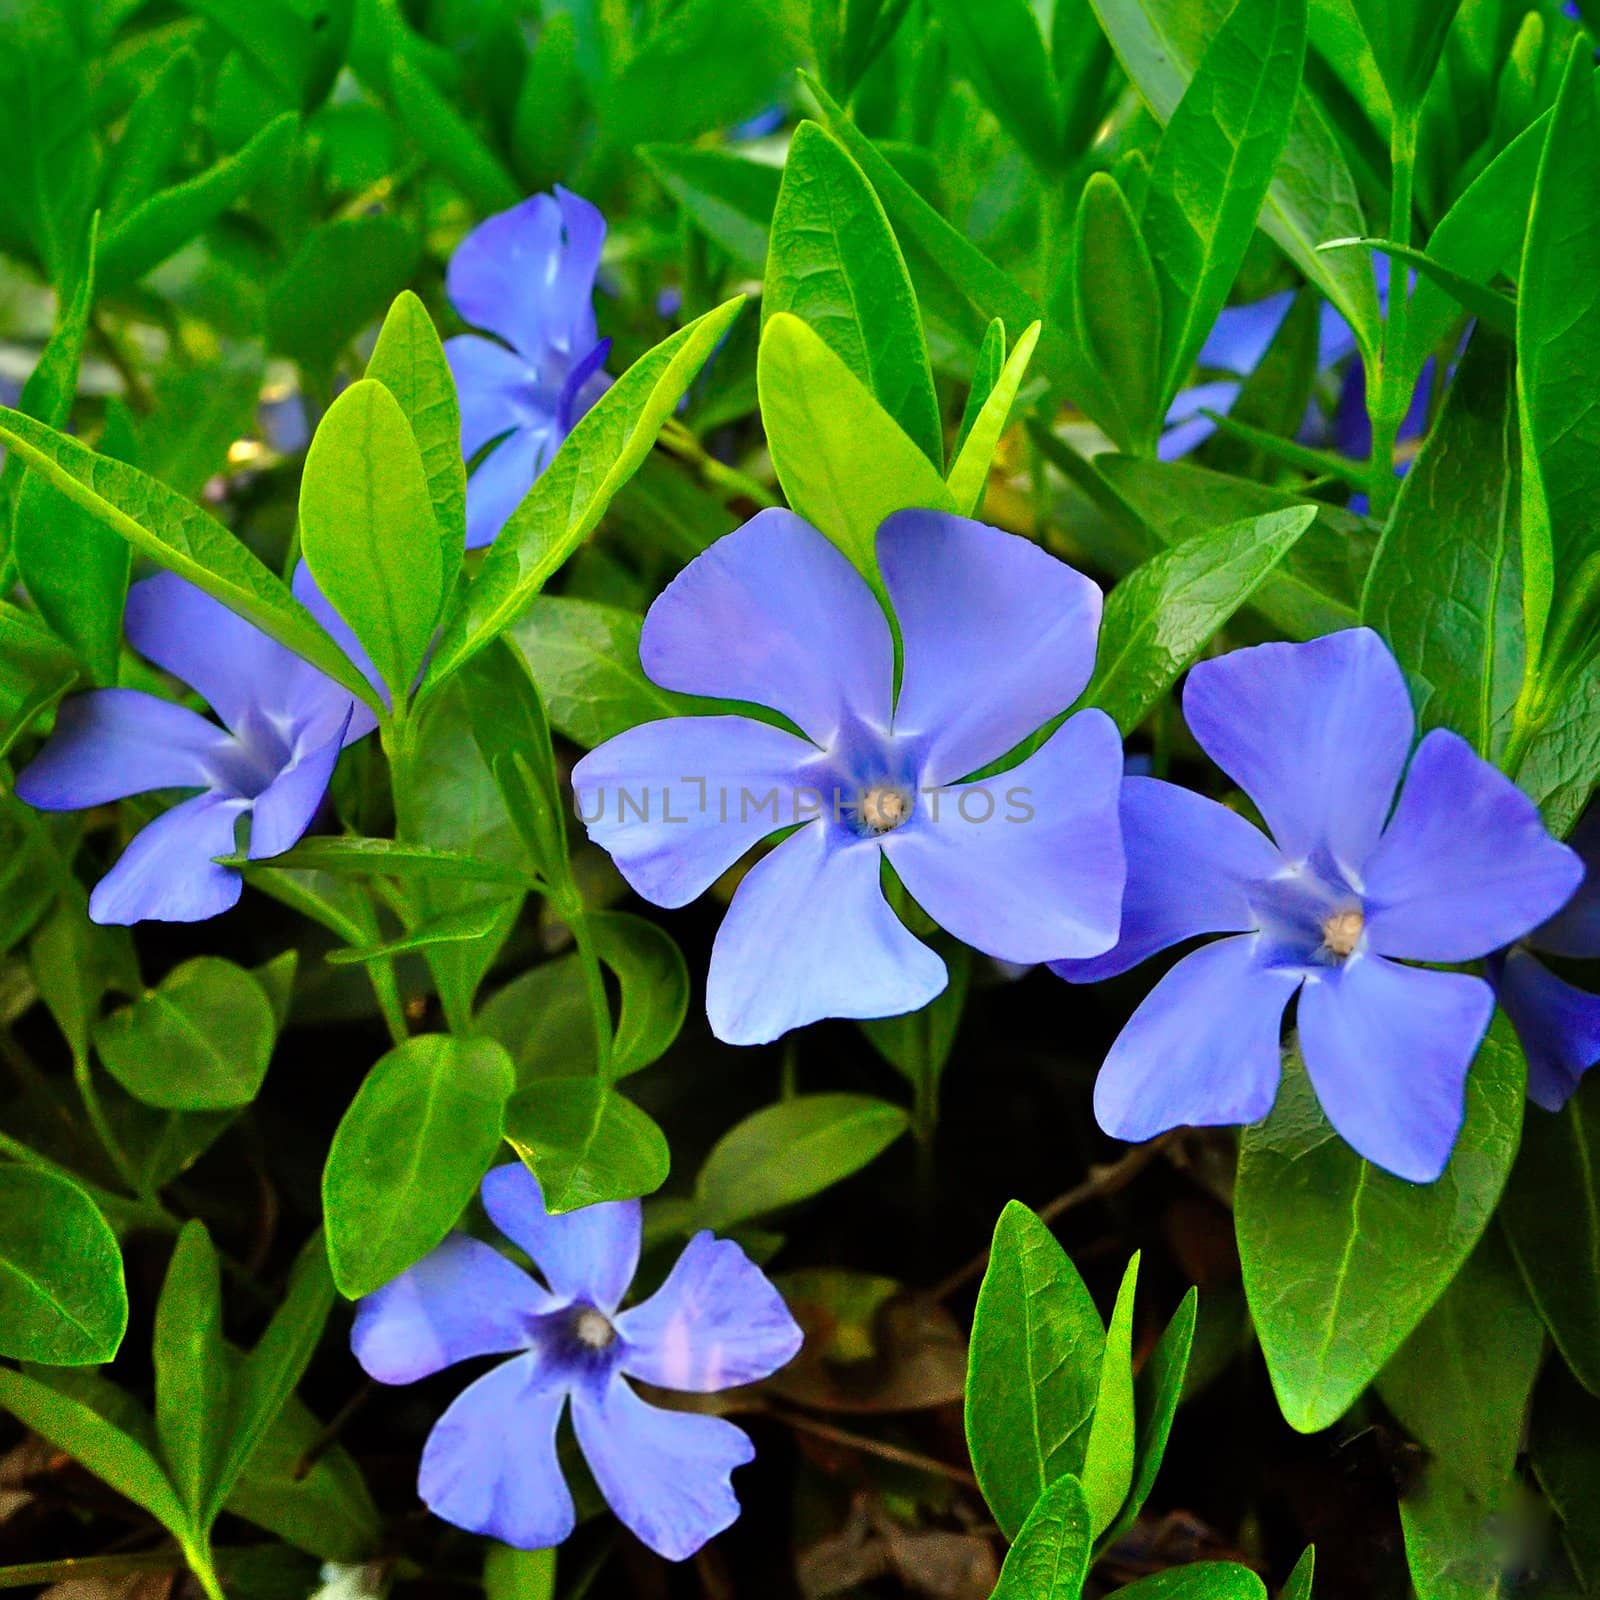 Several periwinkle against a background of green foliage